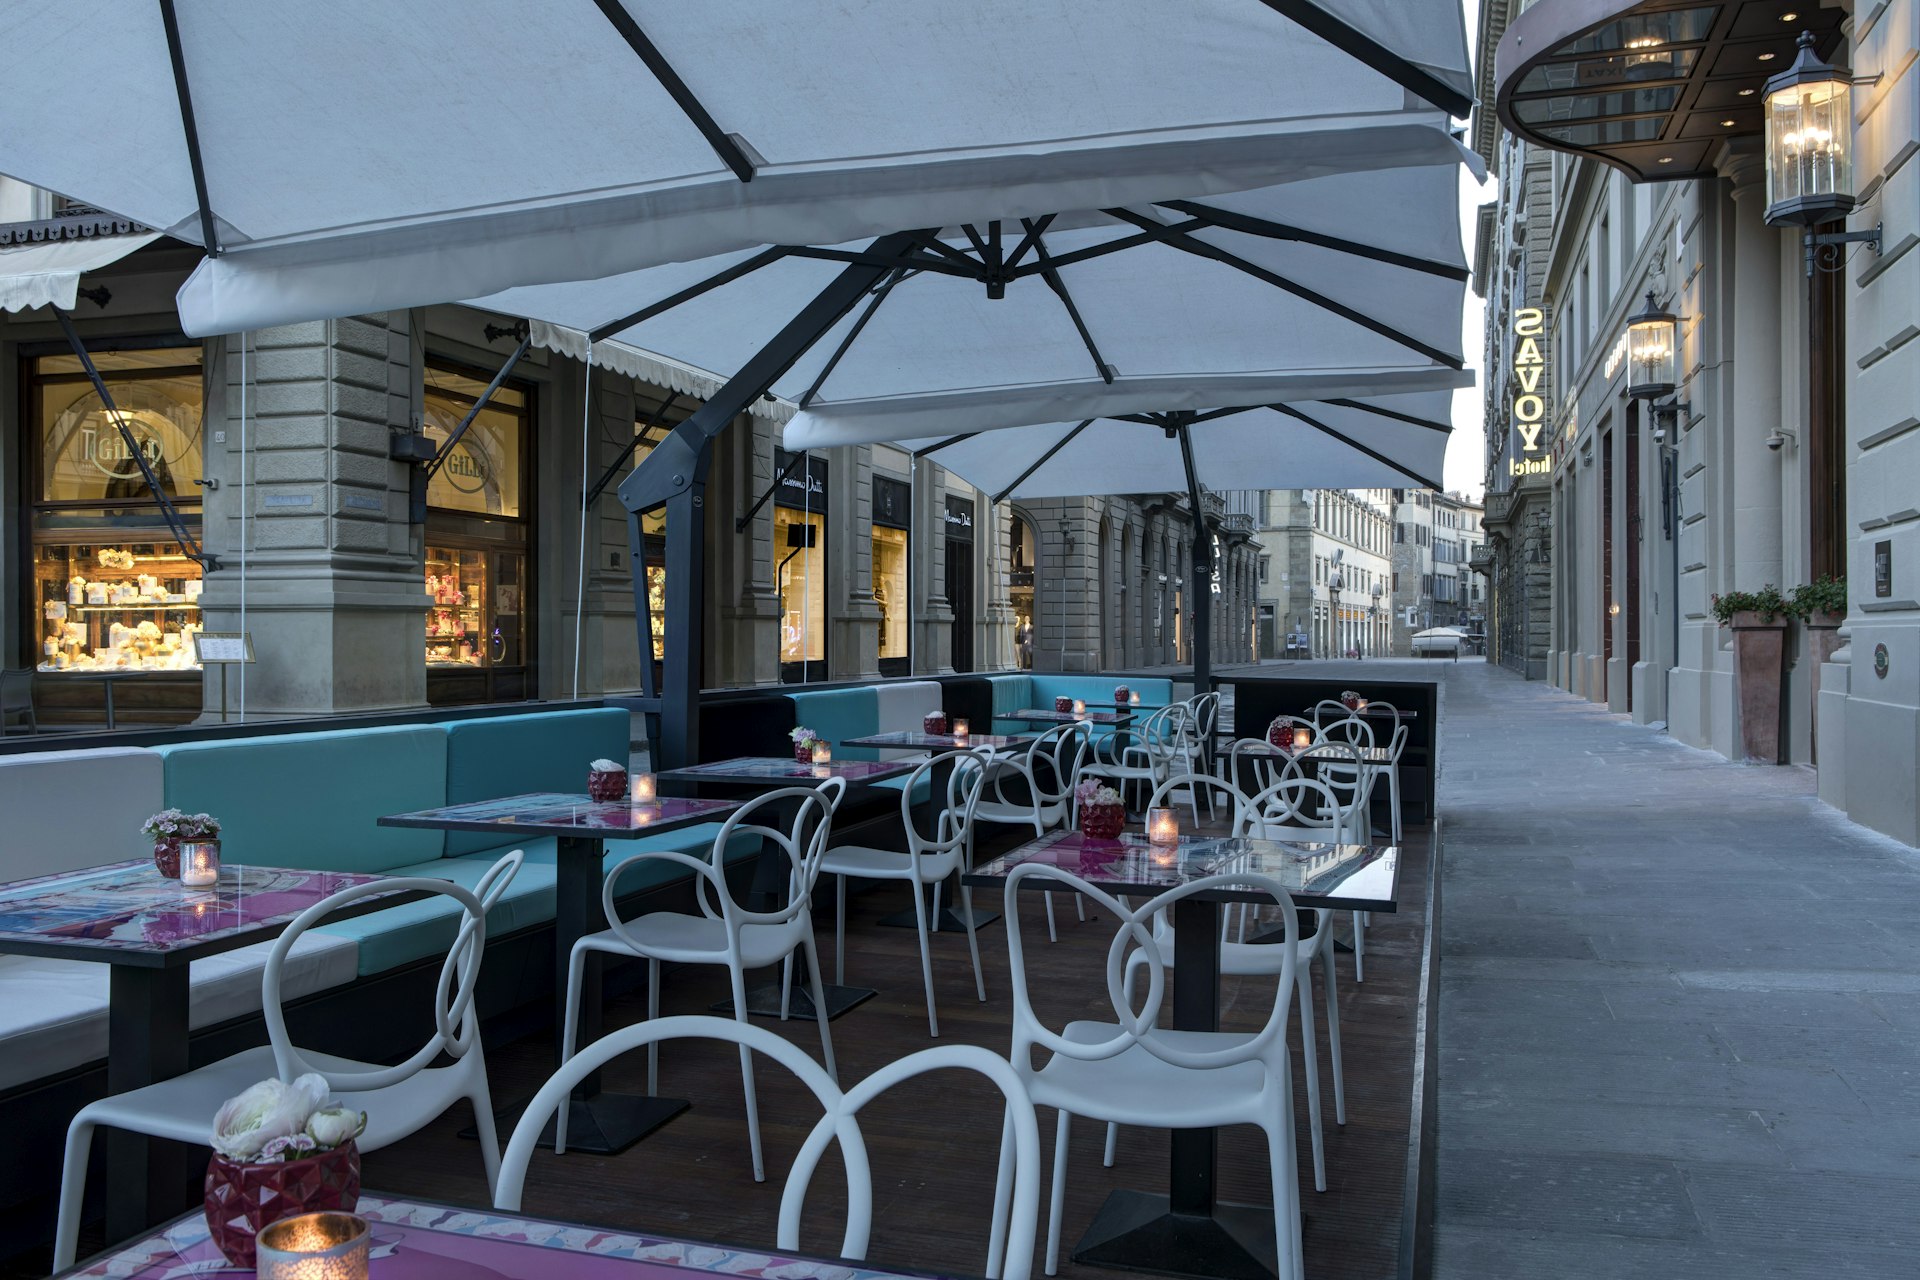 A terrace of tables and chairs on the street outside a restaurant  